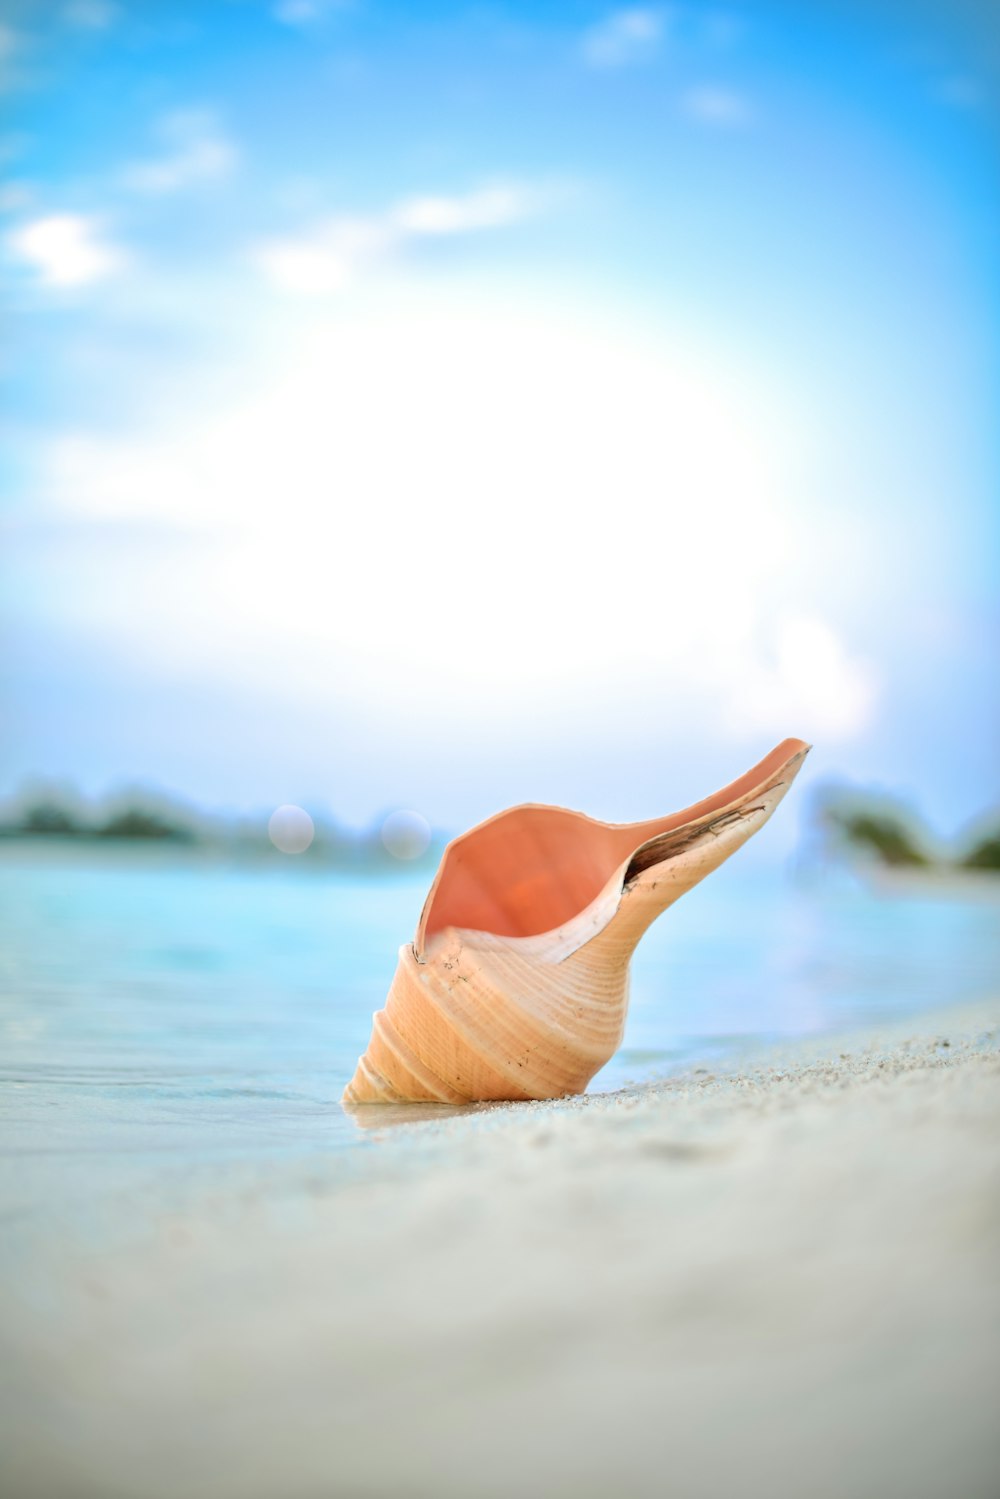 seashell on shore during day